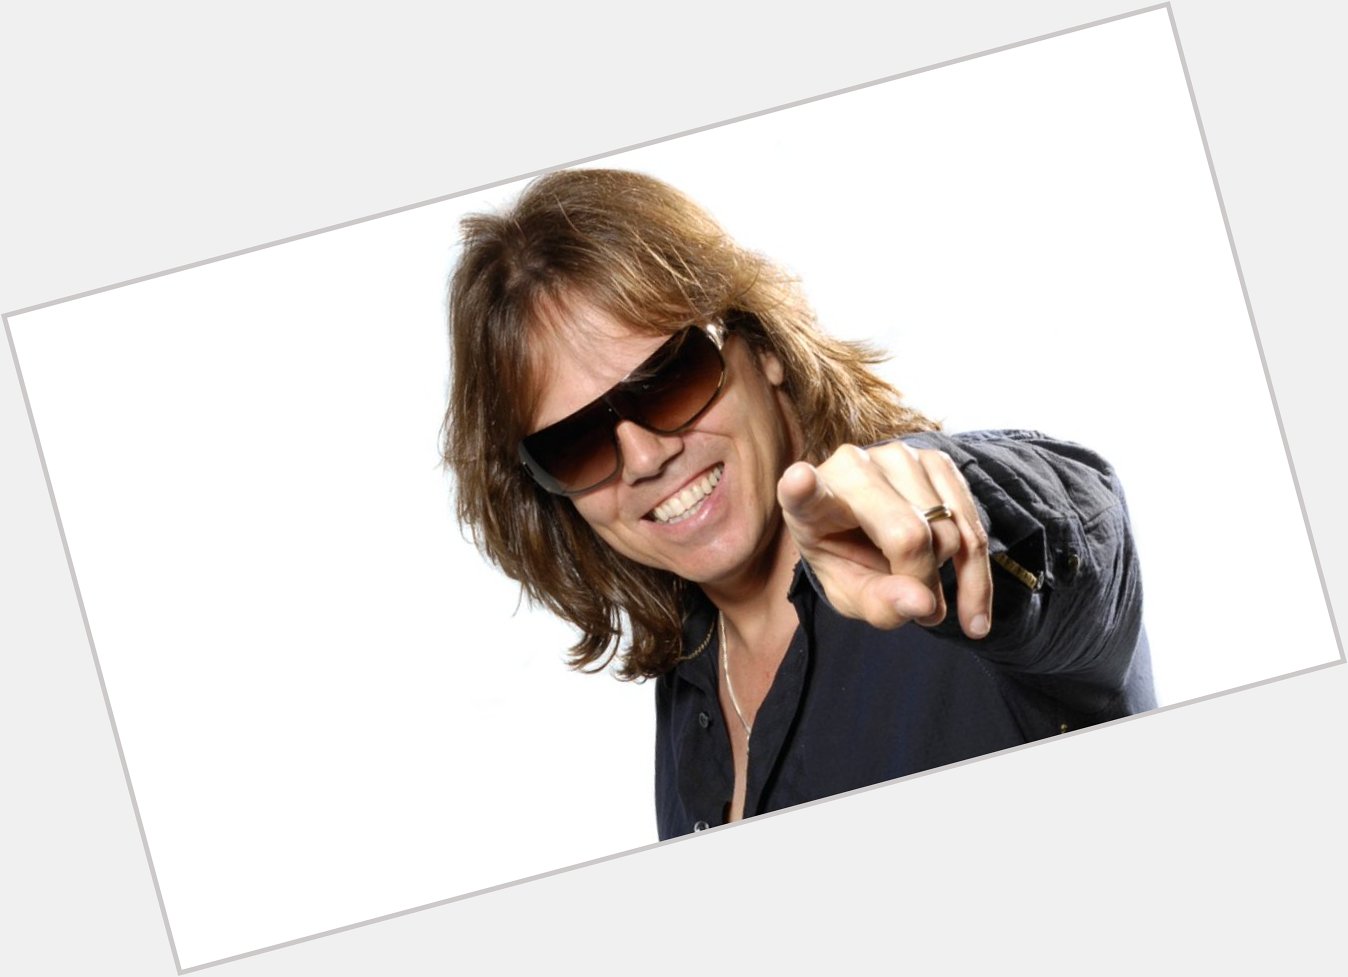 Happy birthday to Joey Tempest, lead singer of the band Europe. 